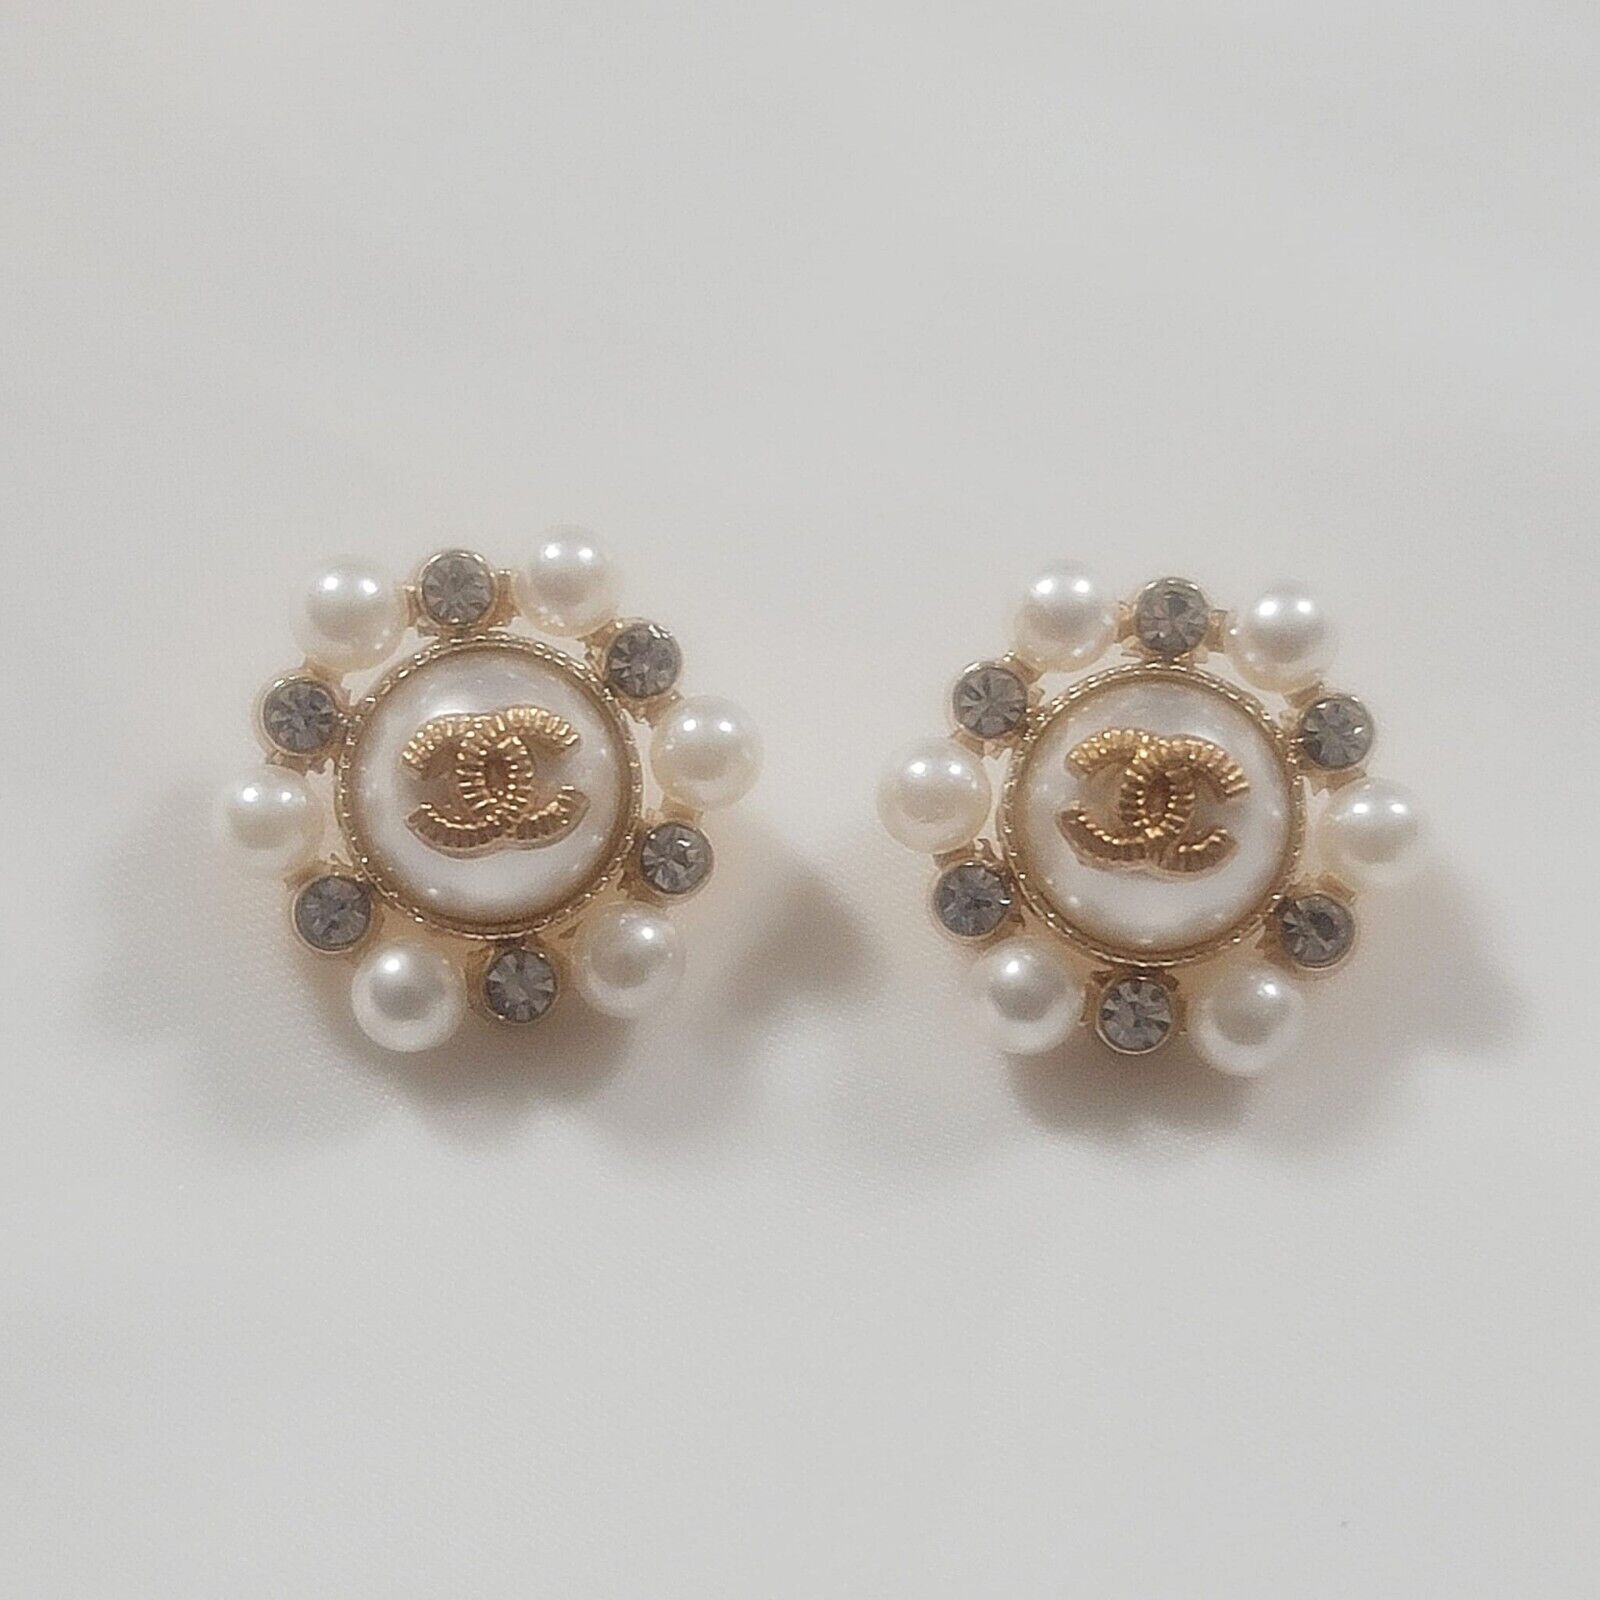 2pc Set 17mm Chanel Buttons